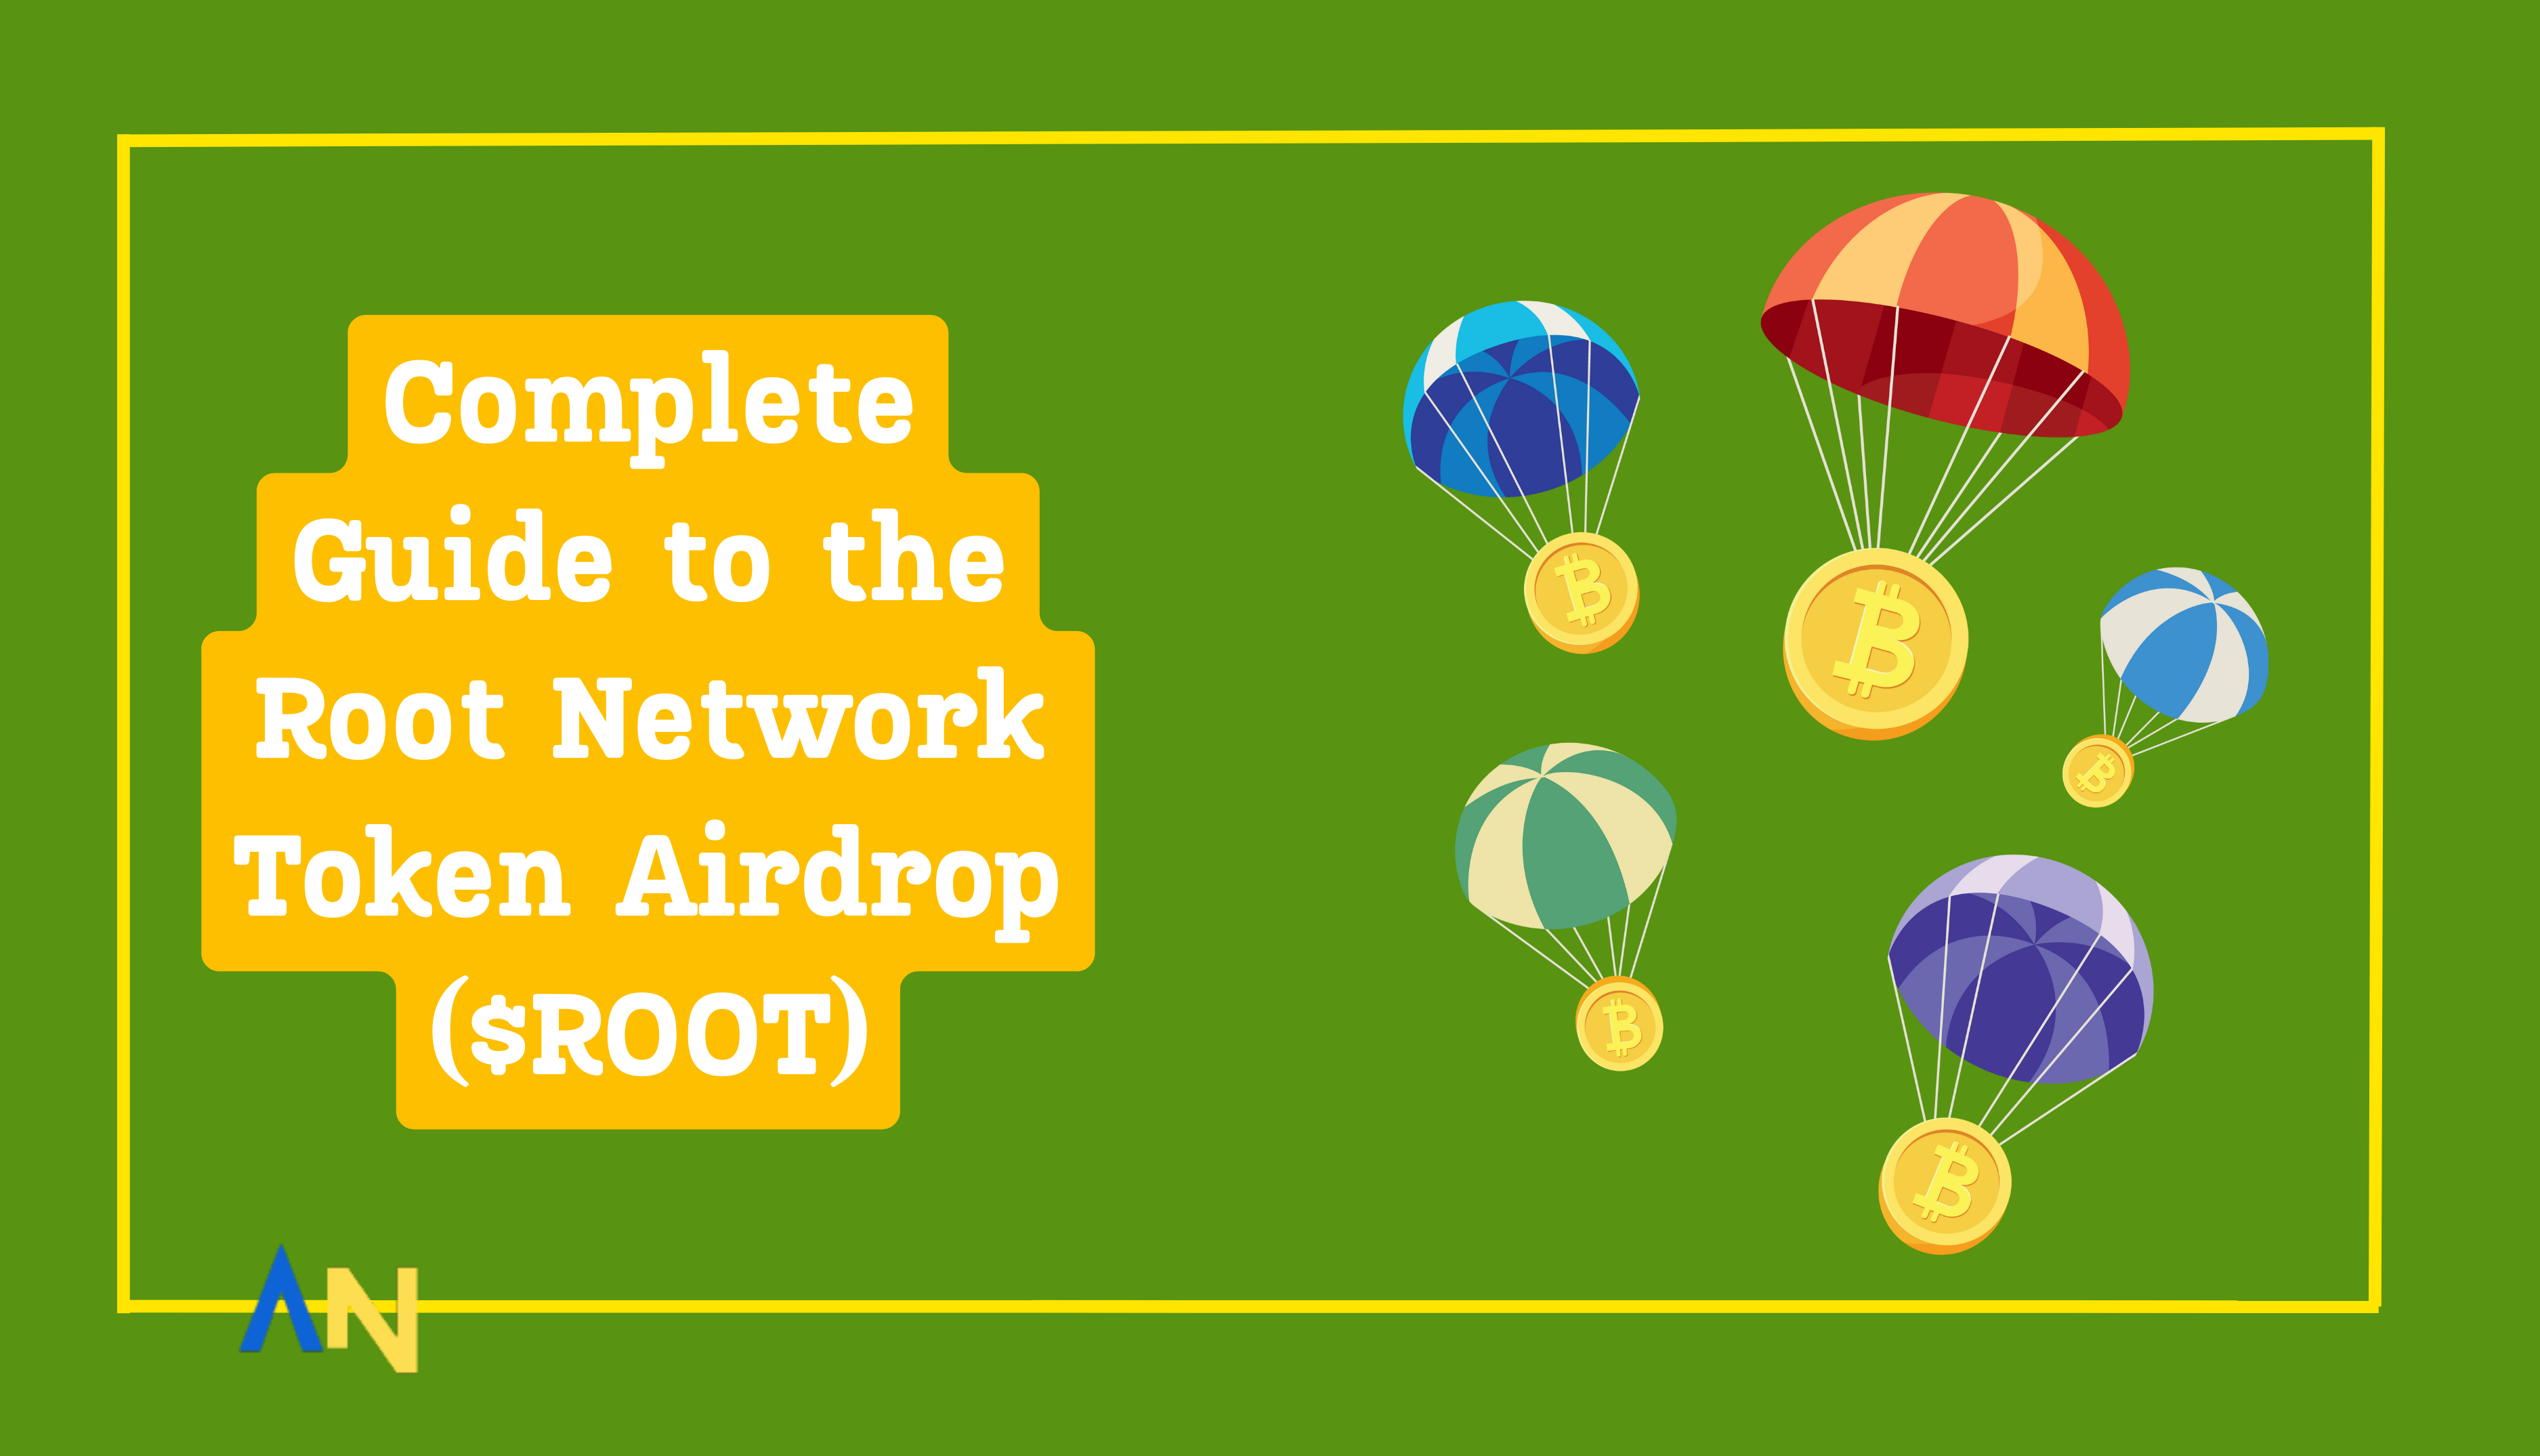 Complete Guide to the Root Network Token Airdrop ($ROOT)